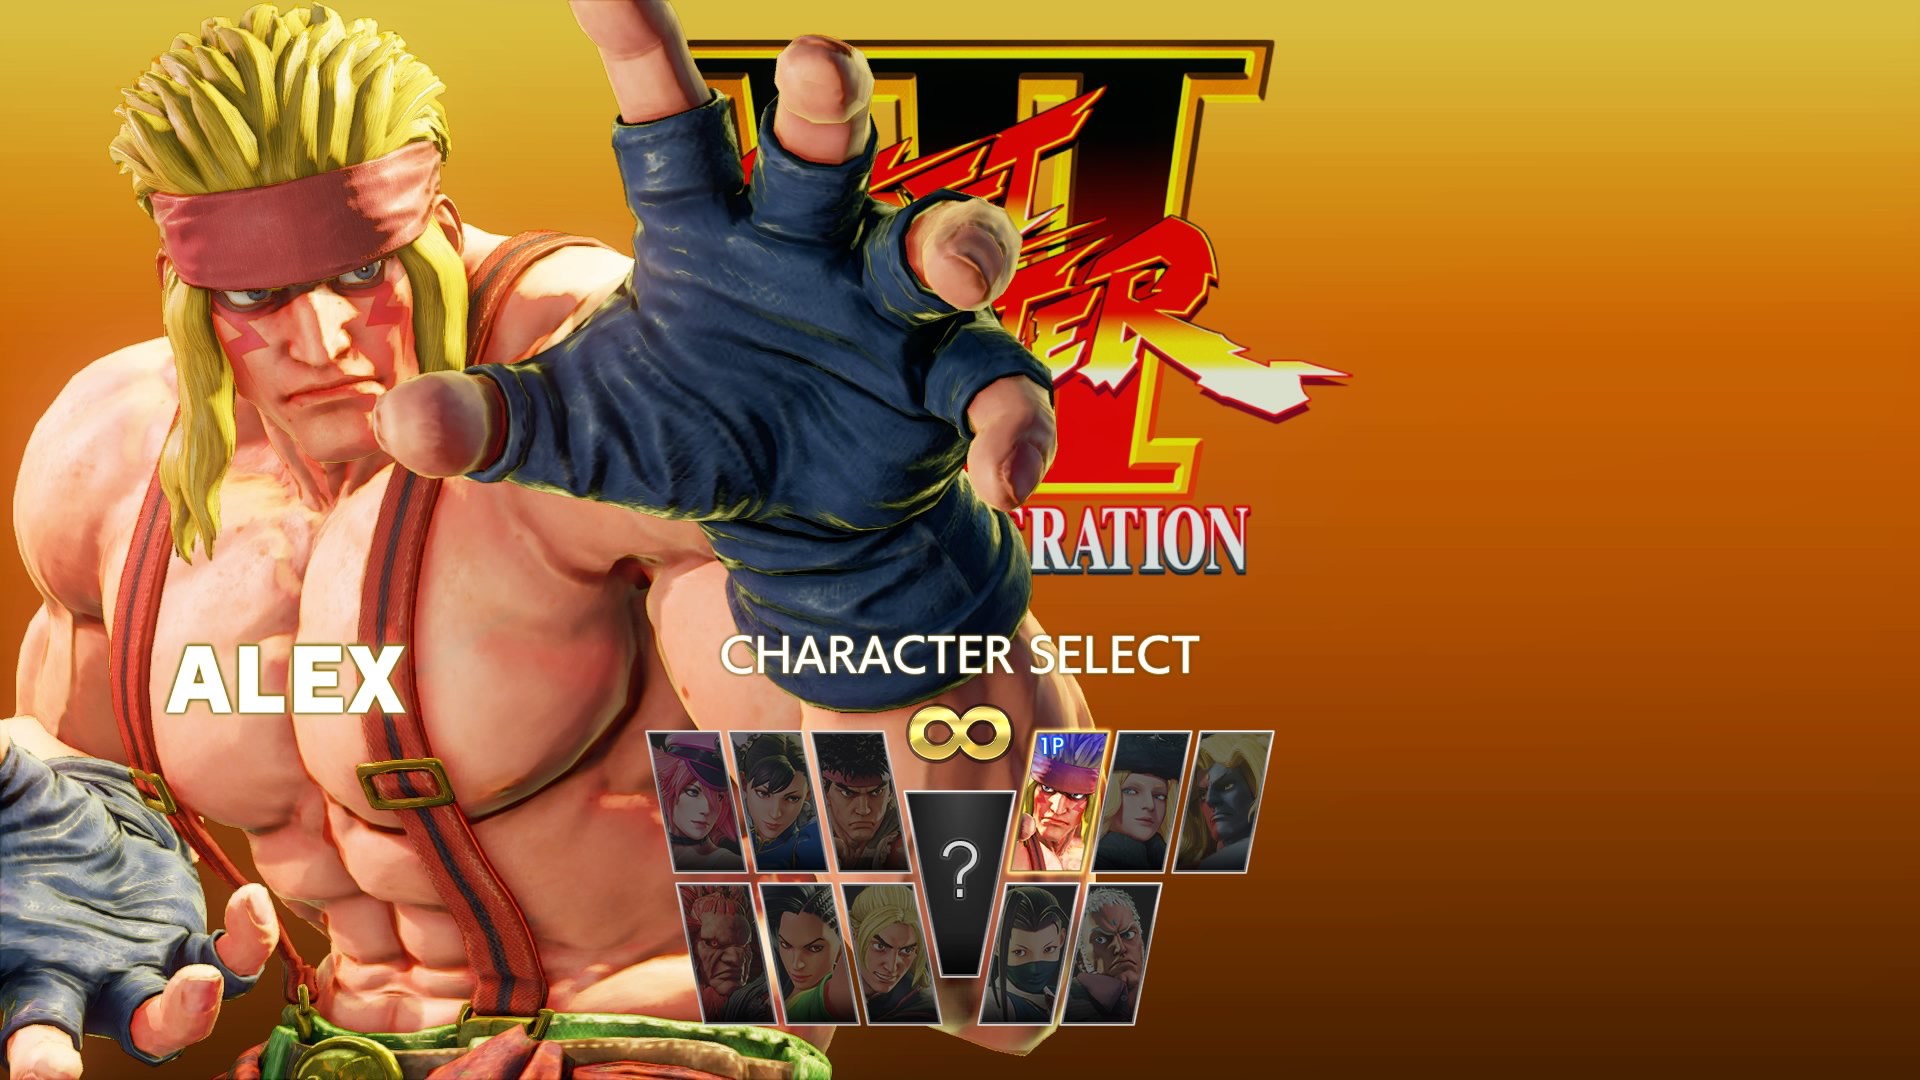 Was Street Fighter 5 On Xbox?